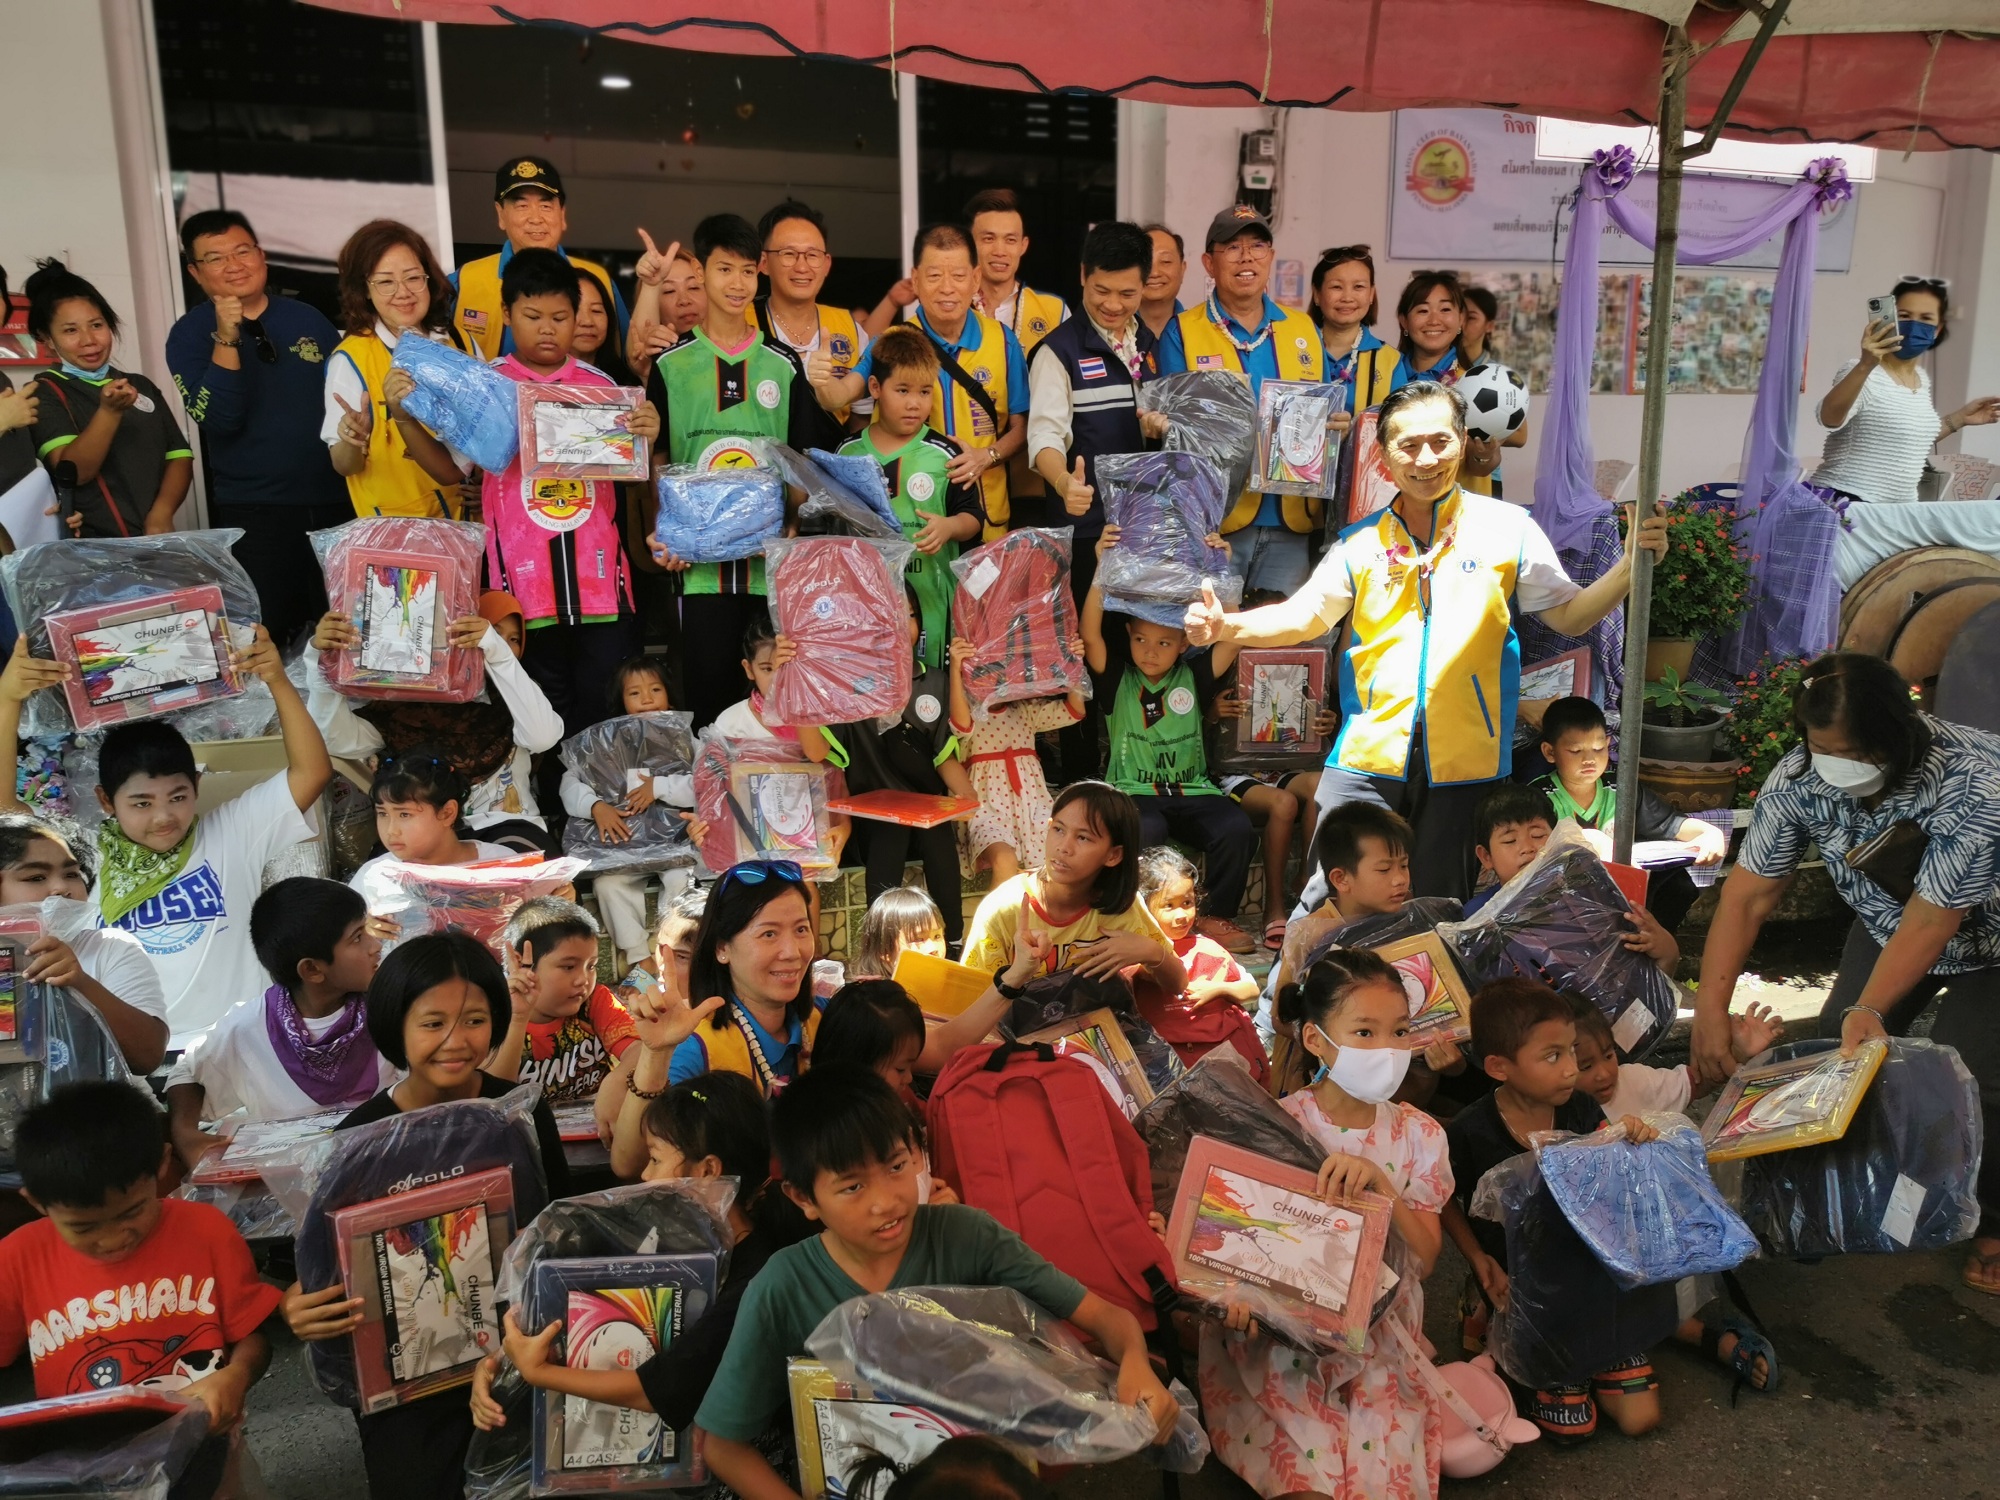 The children happily took a group photo after receiving their schoolbags and stationery.